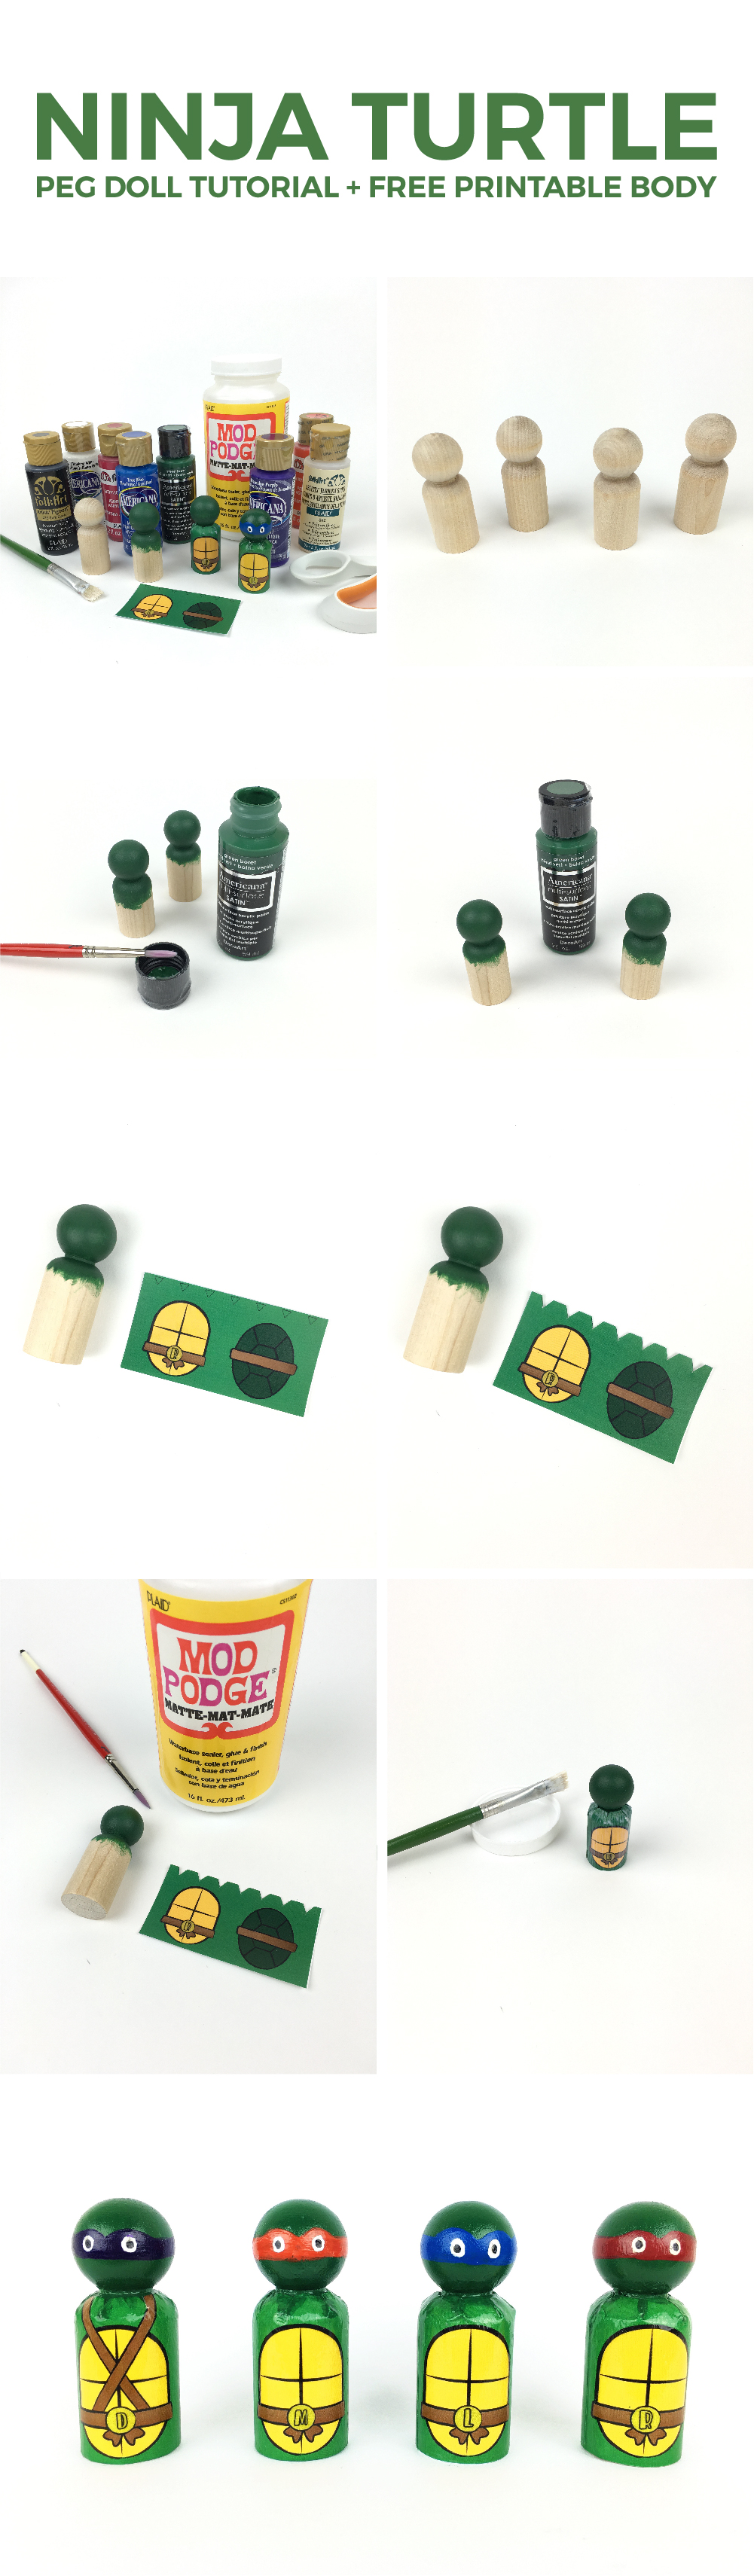 Ninja Turtle Peg Doll Tutorial | Have you always wanted to make a peg doll for you kiddo, but you thought it would be too hard? Then this tutorial is for you! All you have to do is paint the head because the body is a FREE printable. Click through for all the details. 